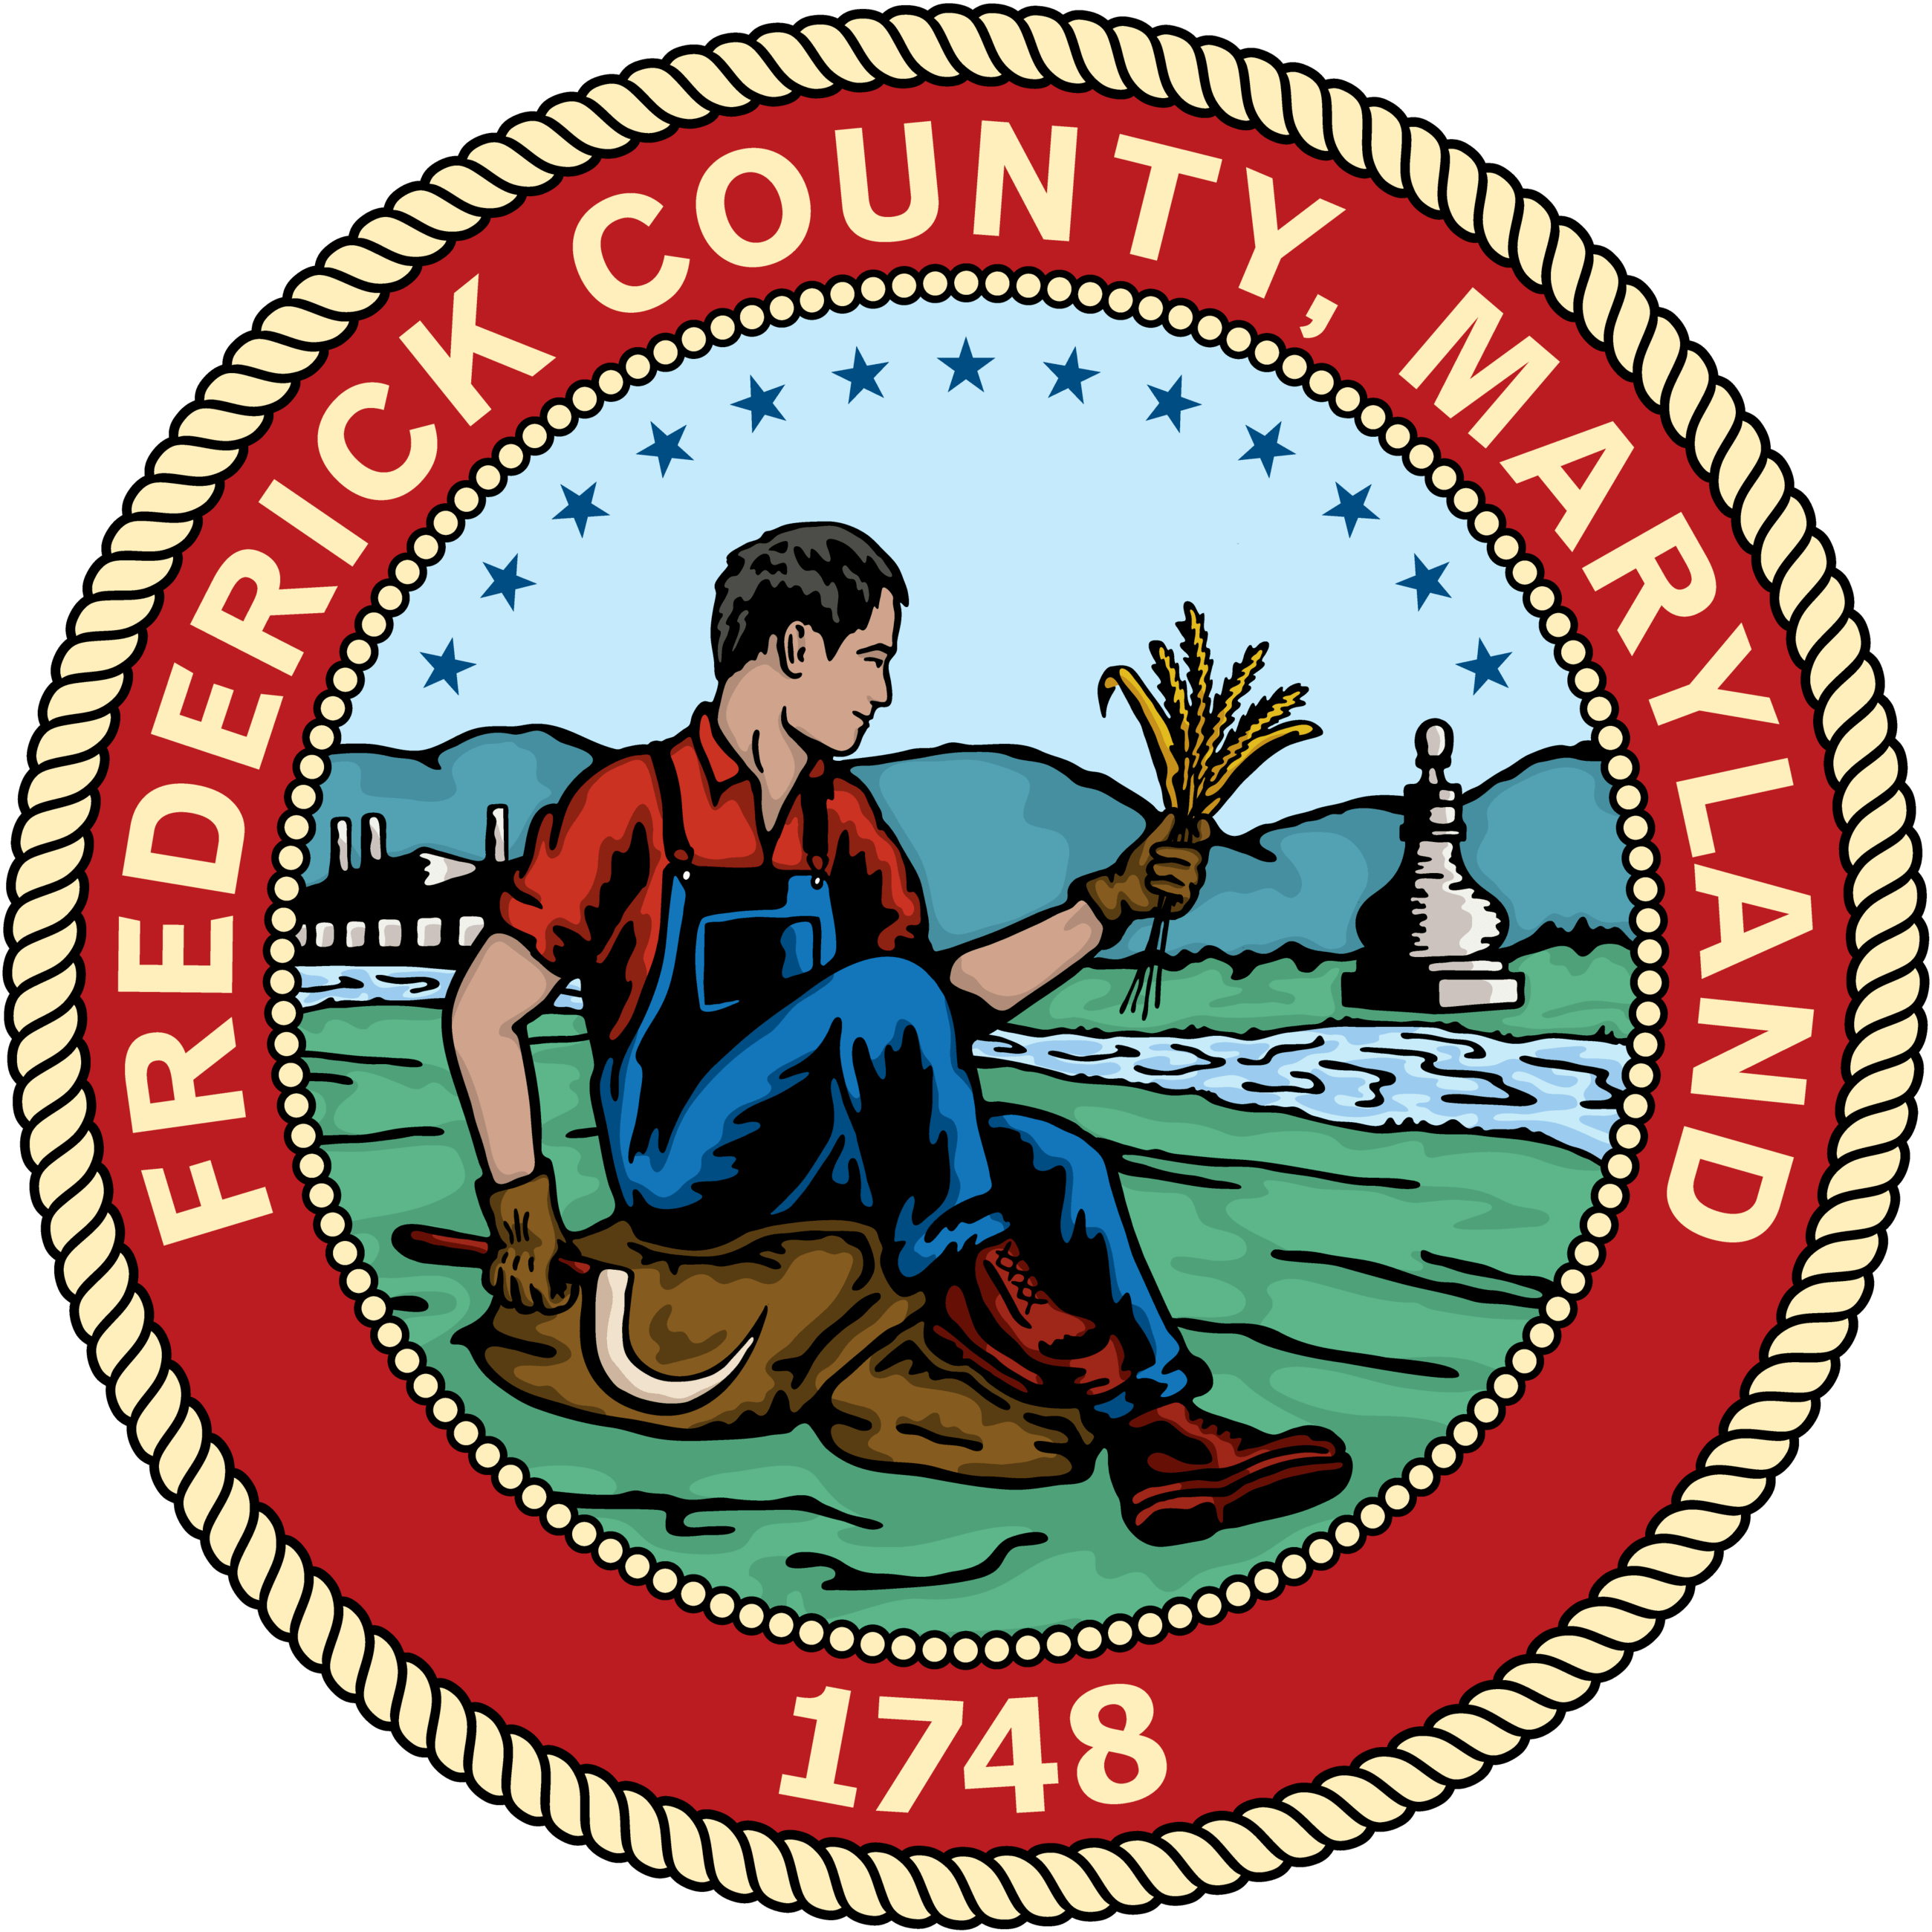 Income Tax Relief Coming For Some Frederick County Residents